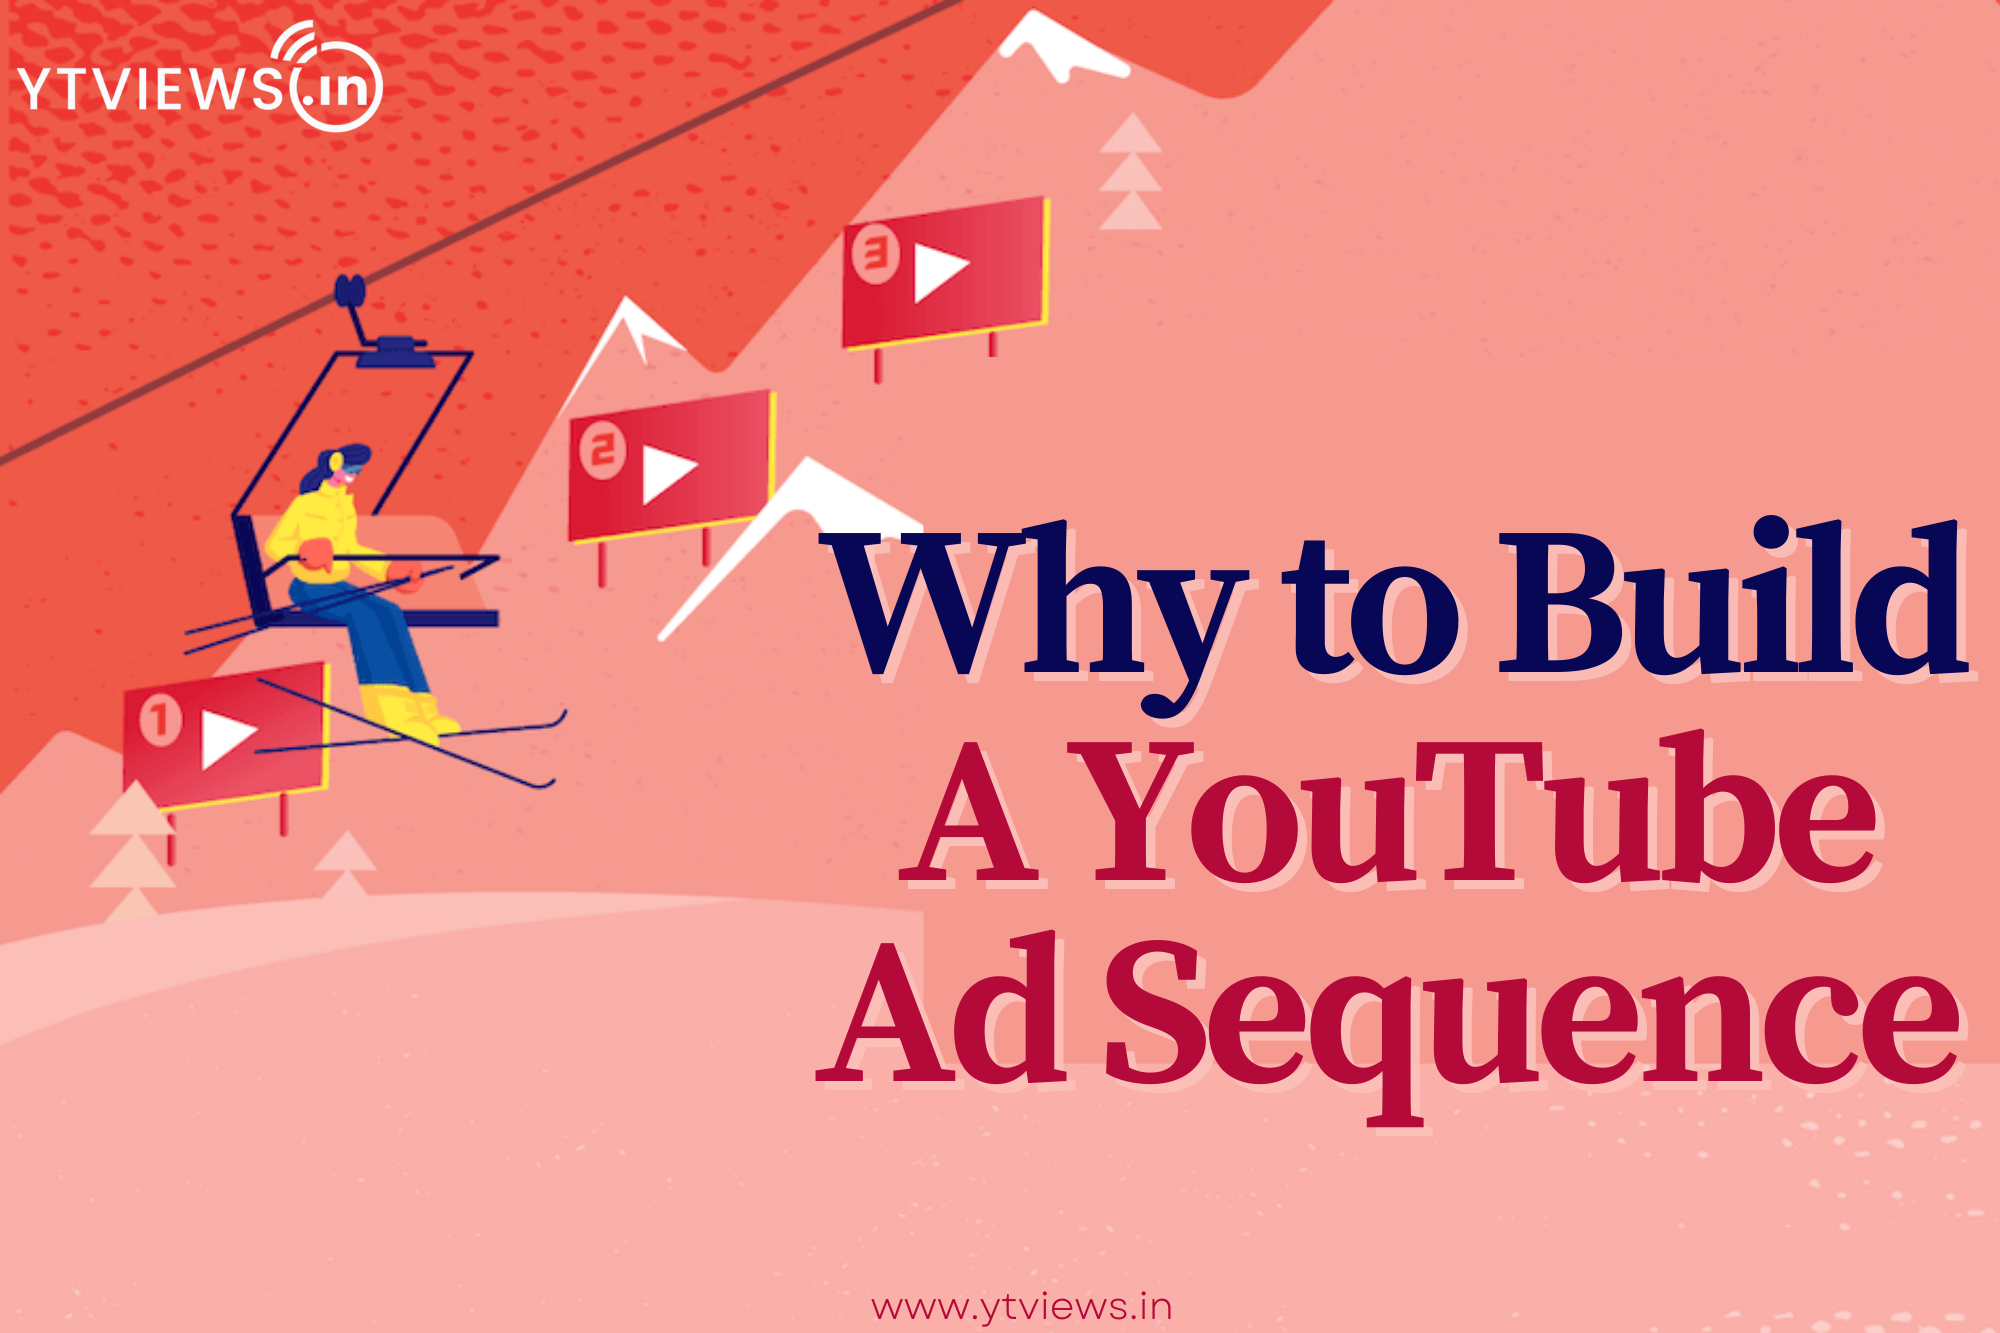 Why to build a YouTube ad sequence